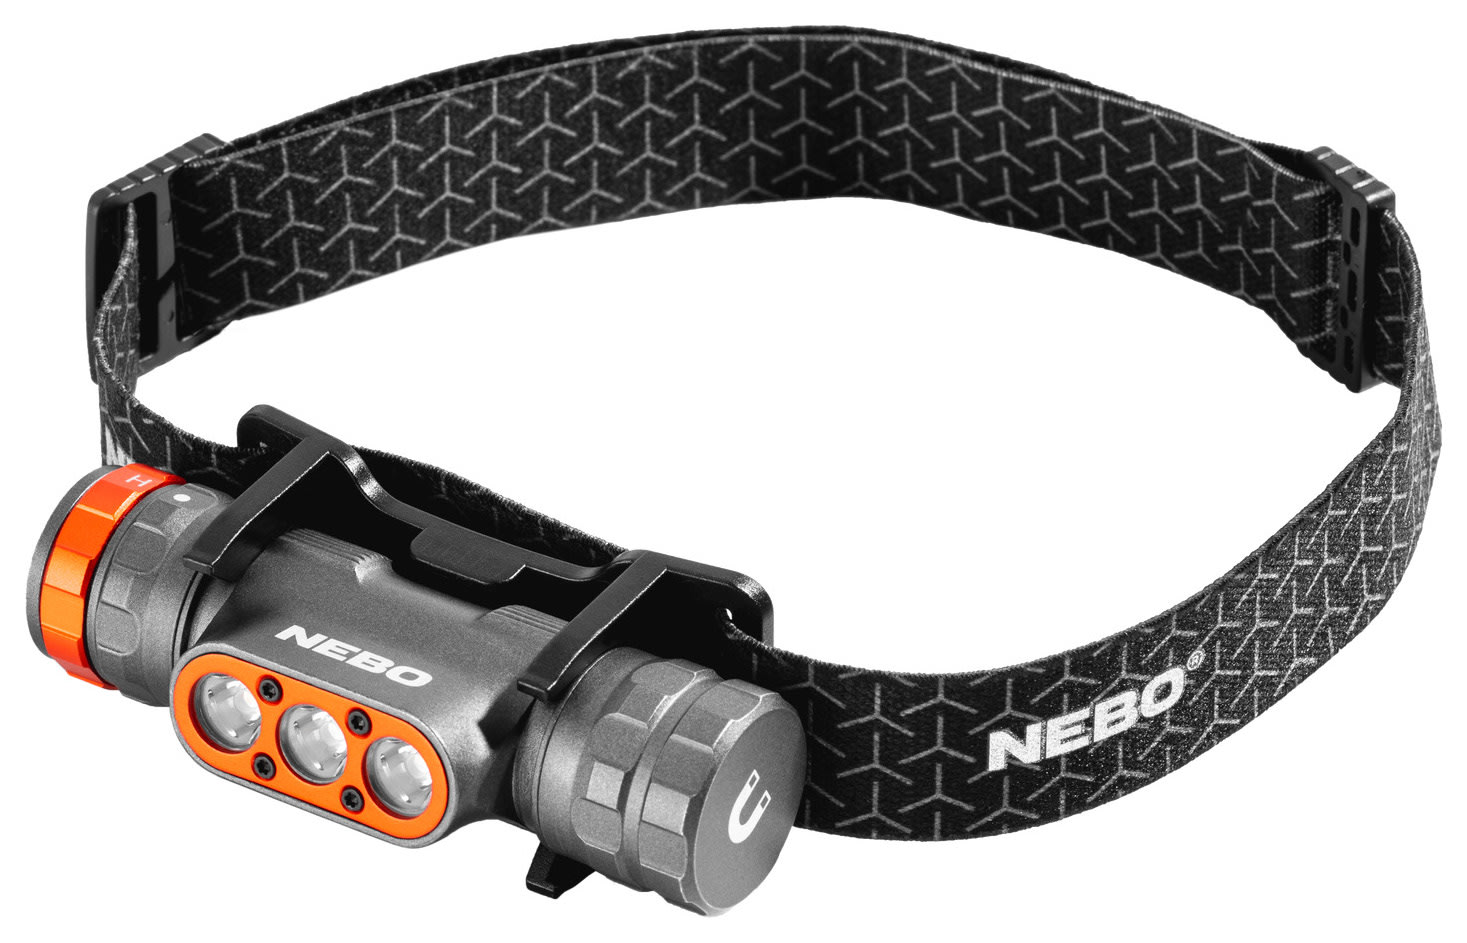 Nebo Transcend 1500lm Rechargeable Headlamp